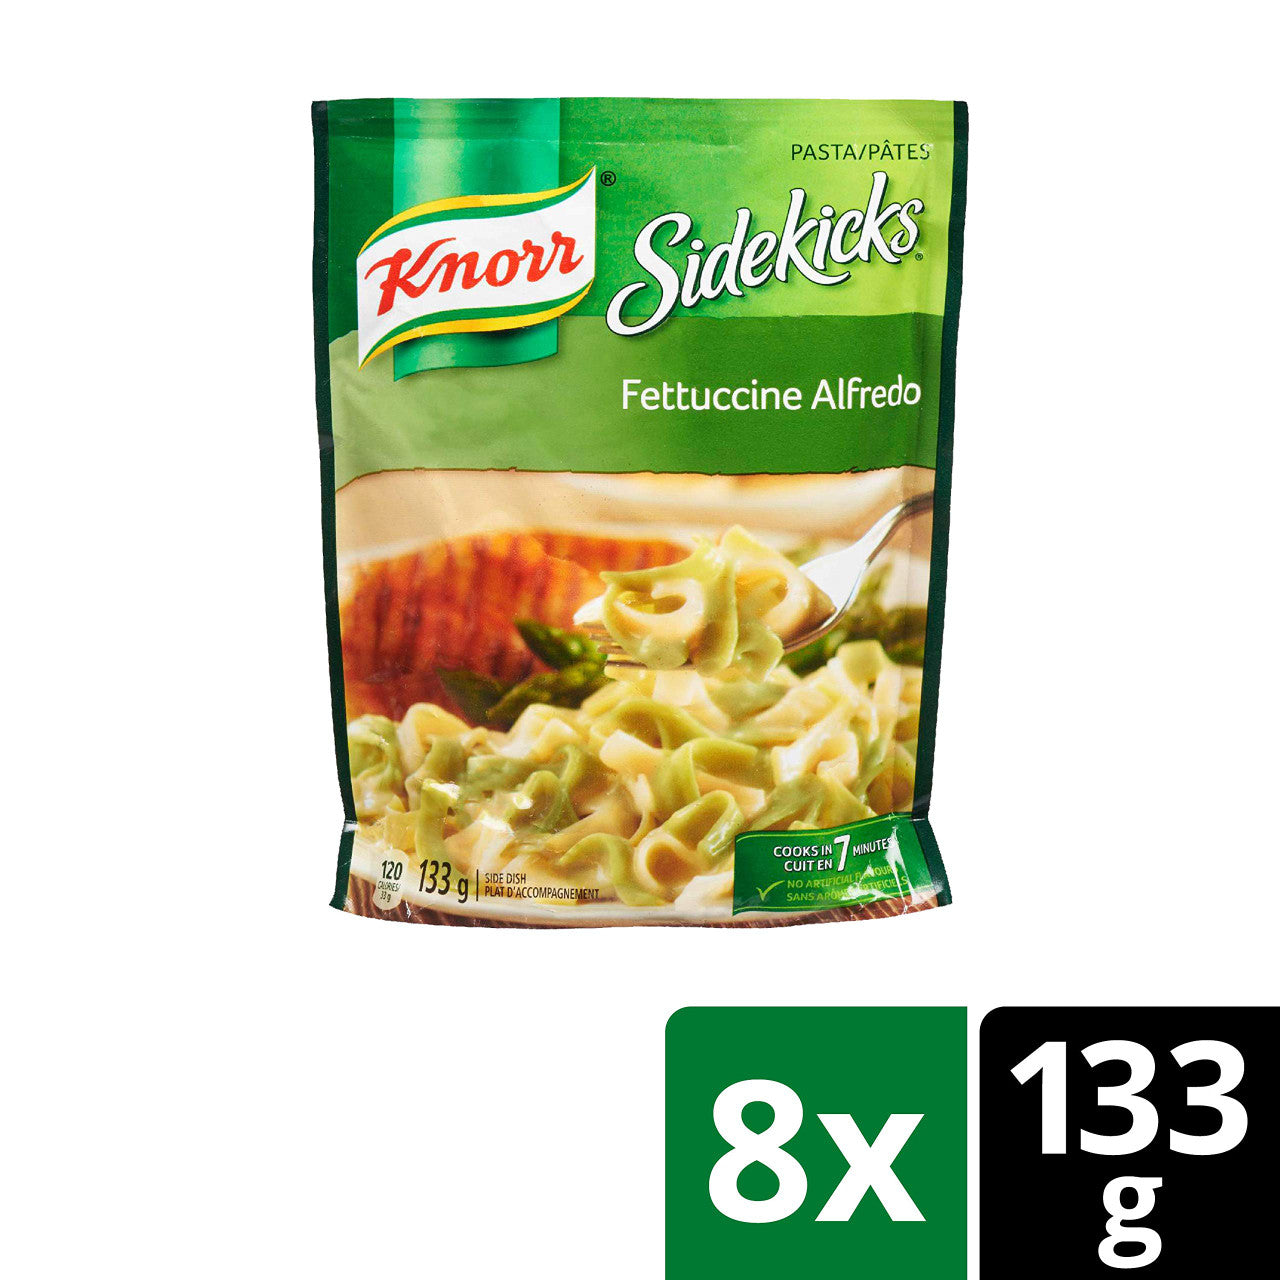 Knorr Sidekicks Pasta Fettucine Alfredo Side Dishes 133 Grams, 8ct Imported from Canada